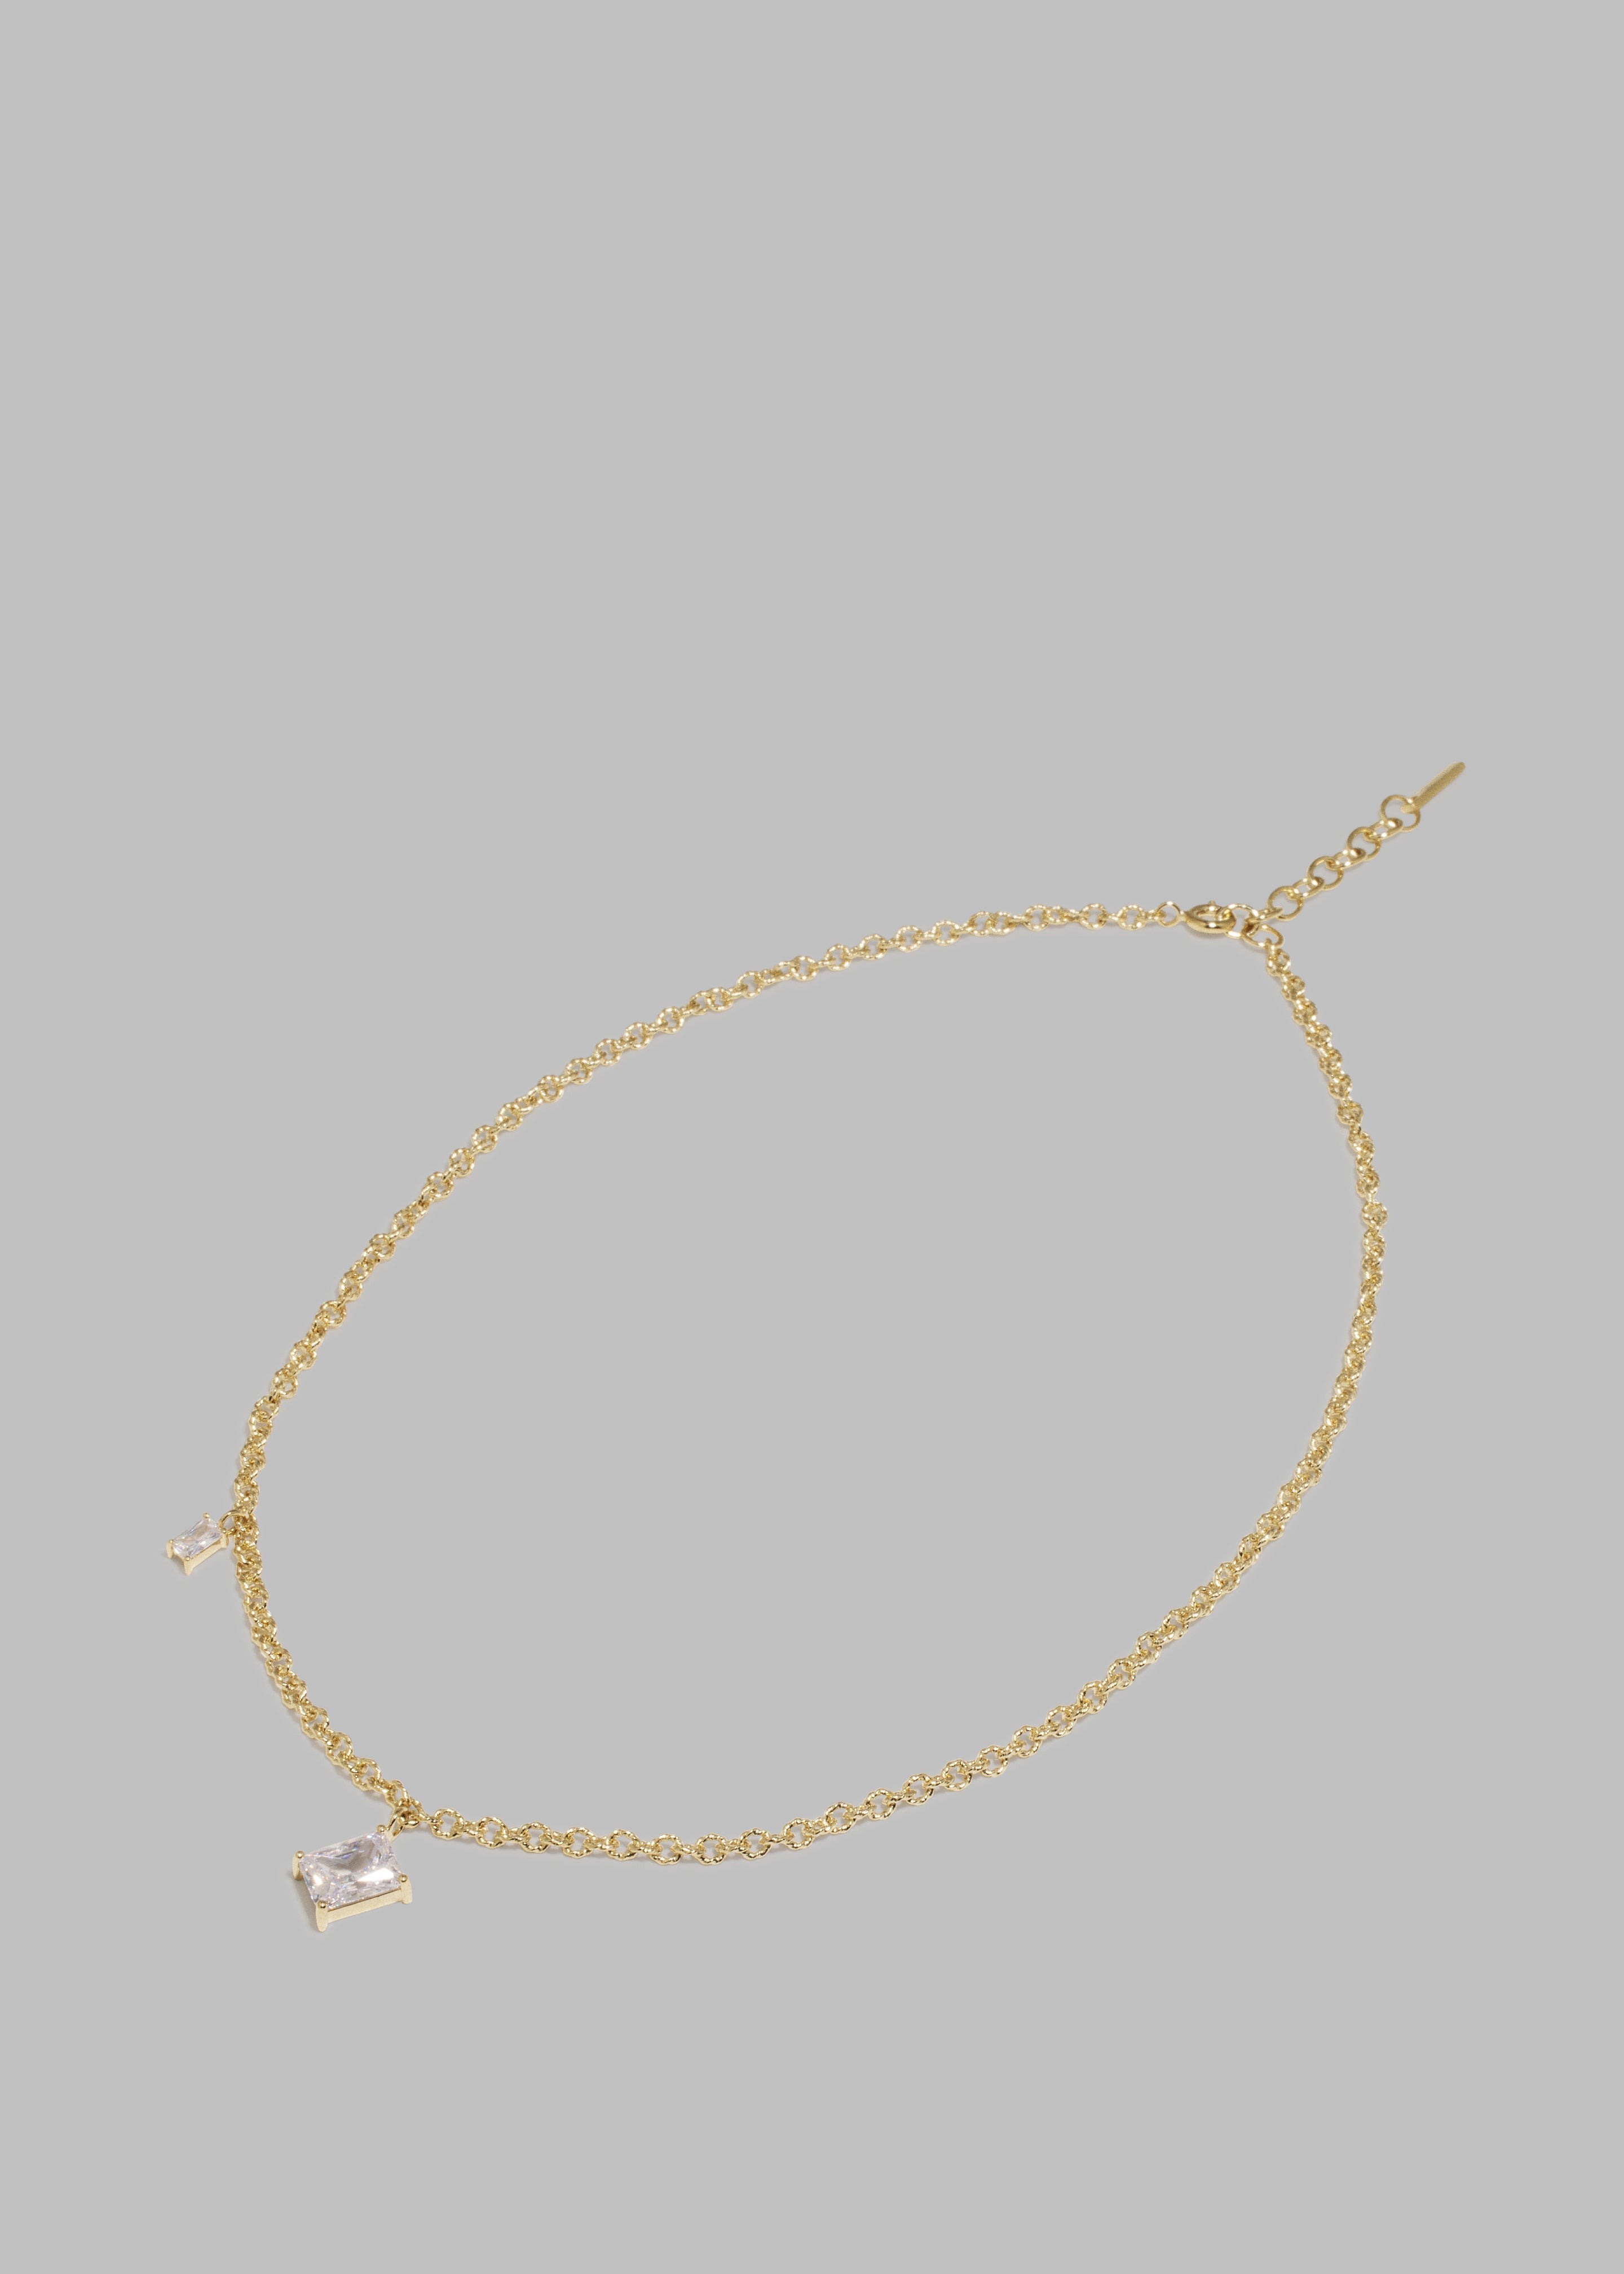 Completedworks Encrypted Dreams Necklace - Cubic Zirconia/Gold Vermeil - 5